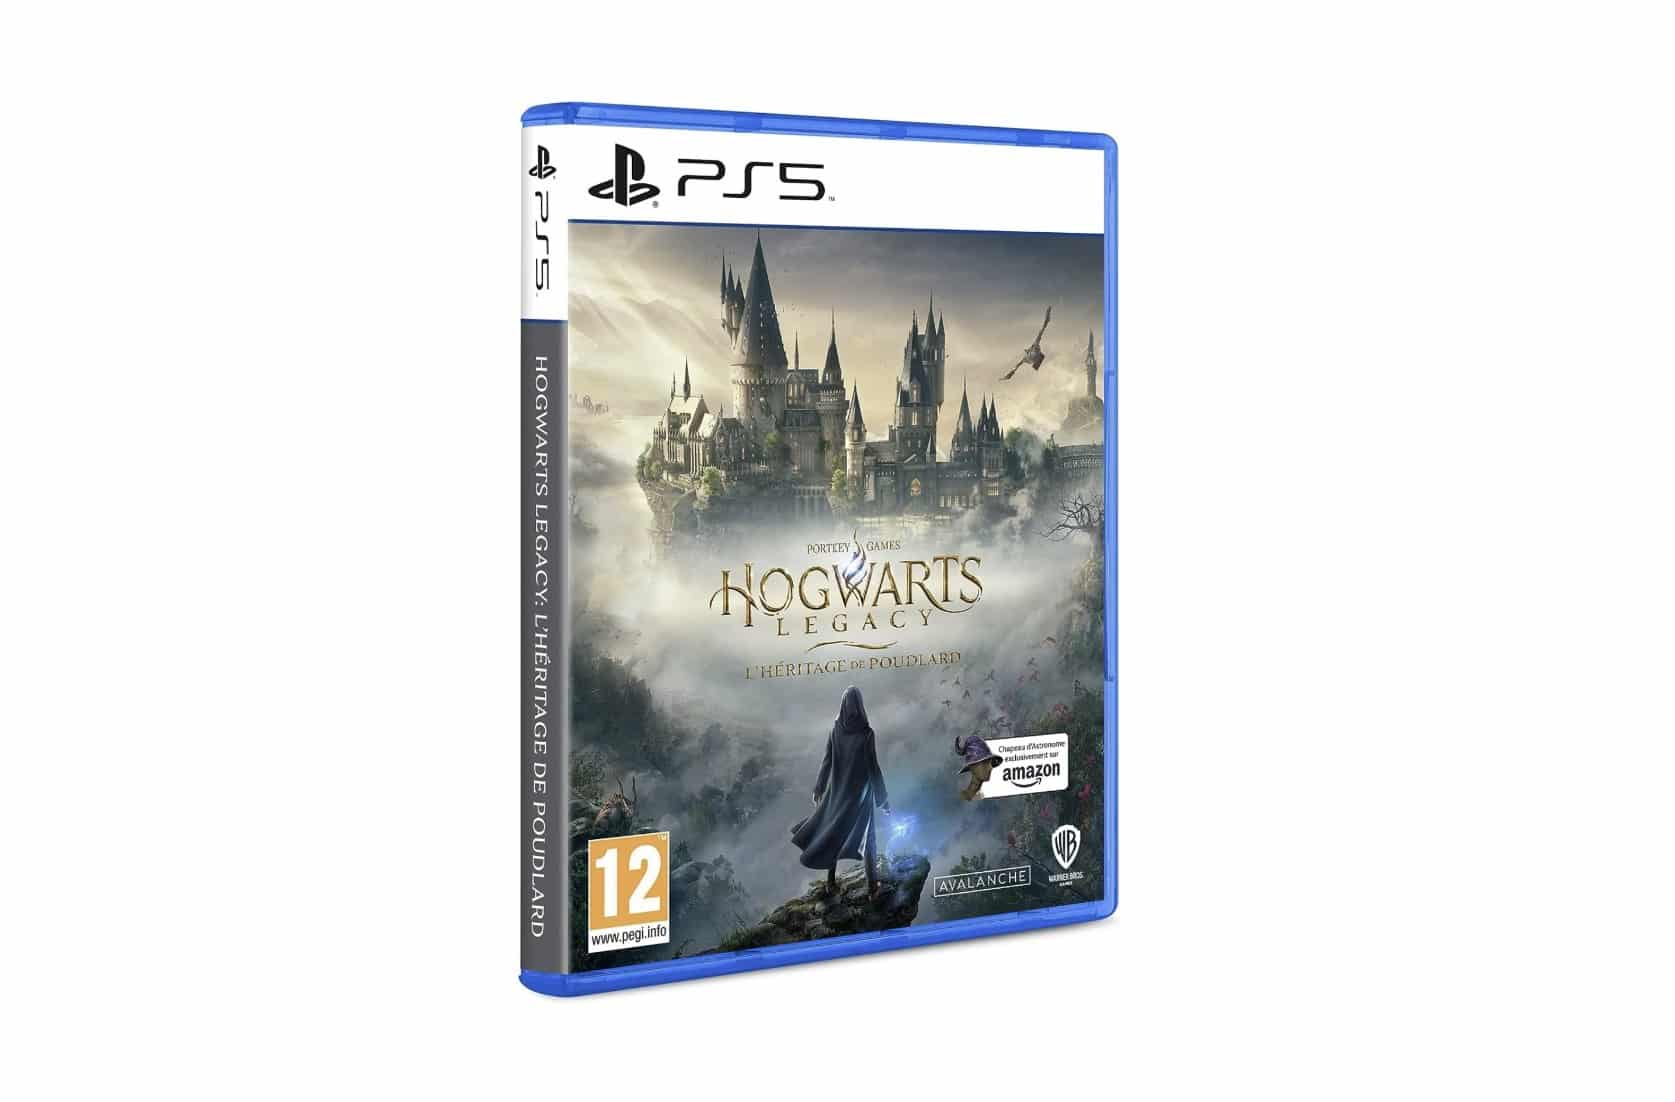 Hogwarts Legacy - Edition Exclusive Amazon PS5